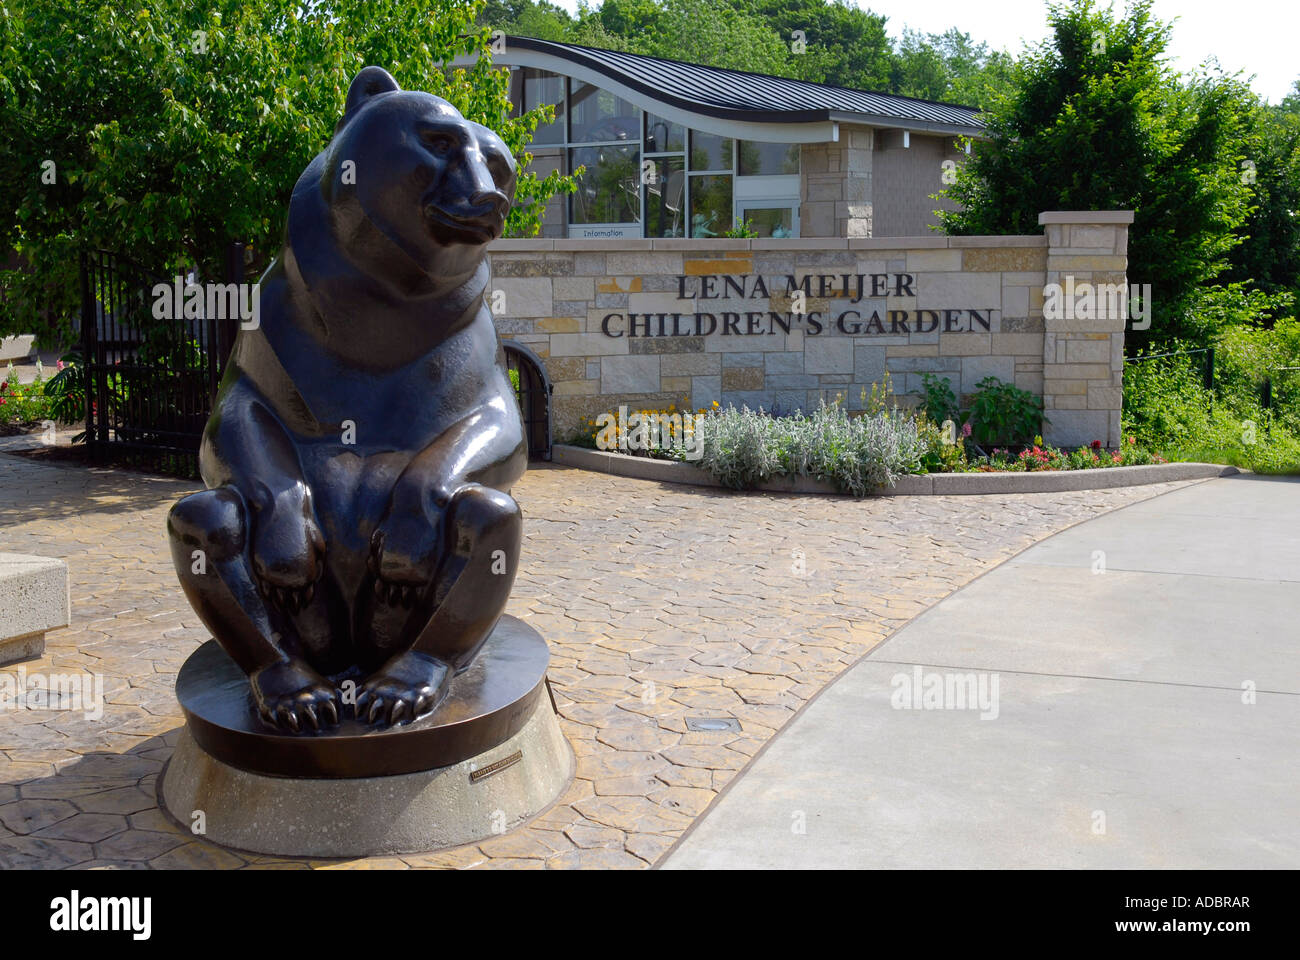 Bear at the entrance of Lena Meijer Children s Garden at The Frederik Meijer Gardens and Sculpture Park in Grand Rapids Michigan Stock Photo